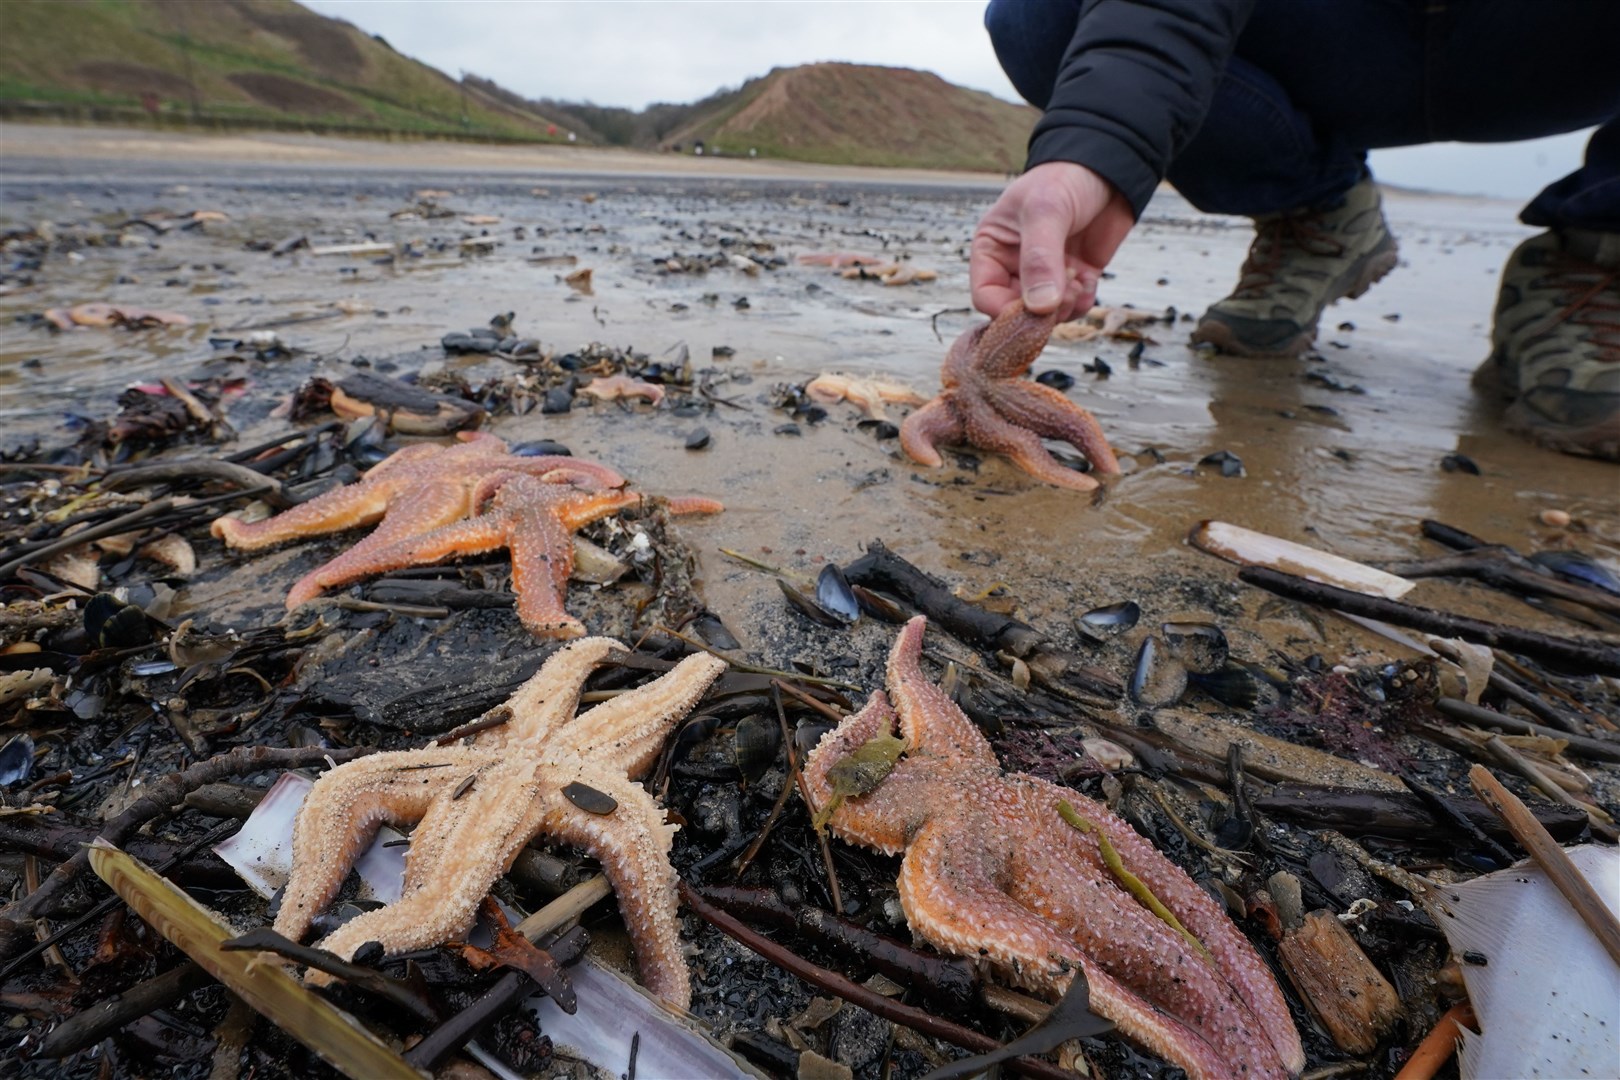 Starfish, clams, oysters and crabs could be seen washed up on the black sand (Owen Humphreys/PA)